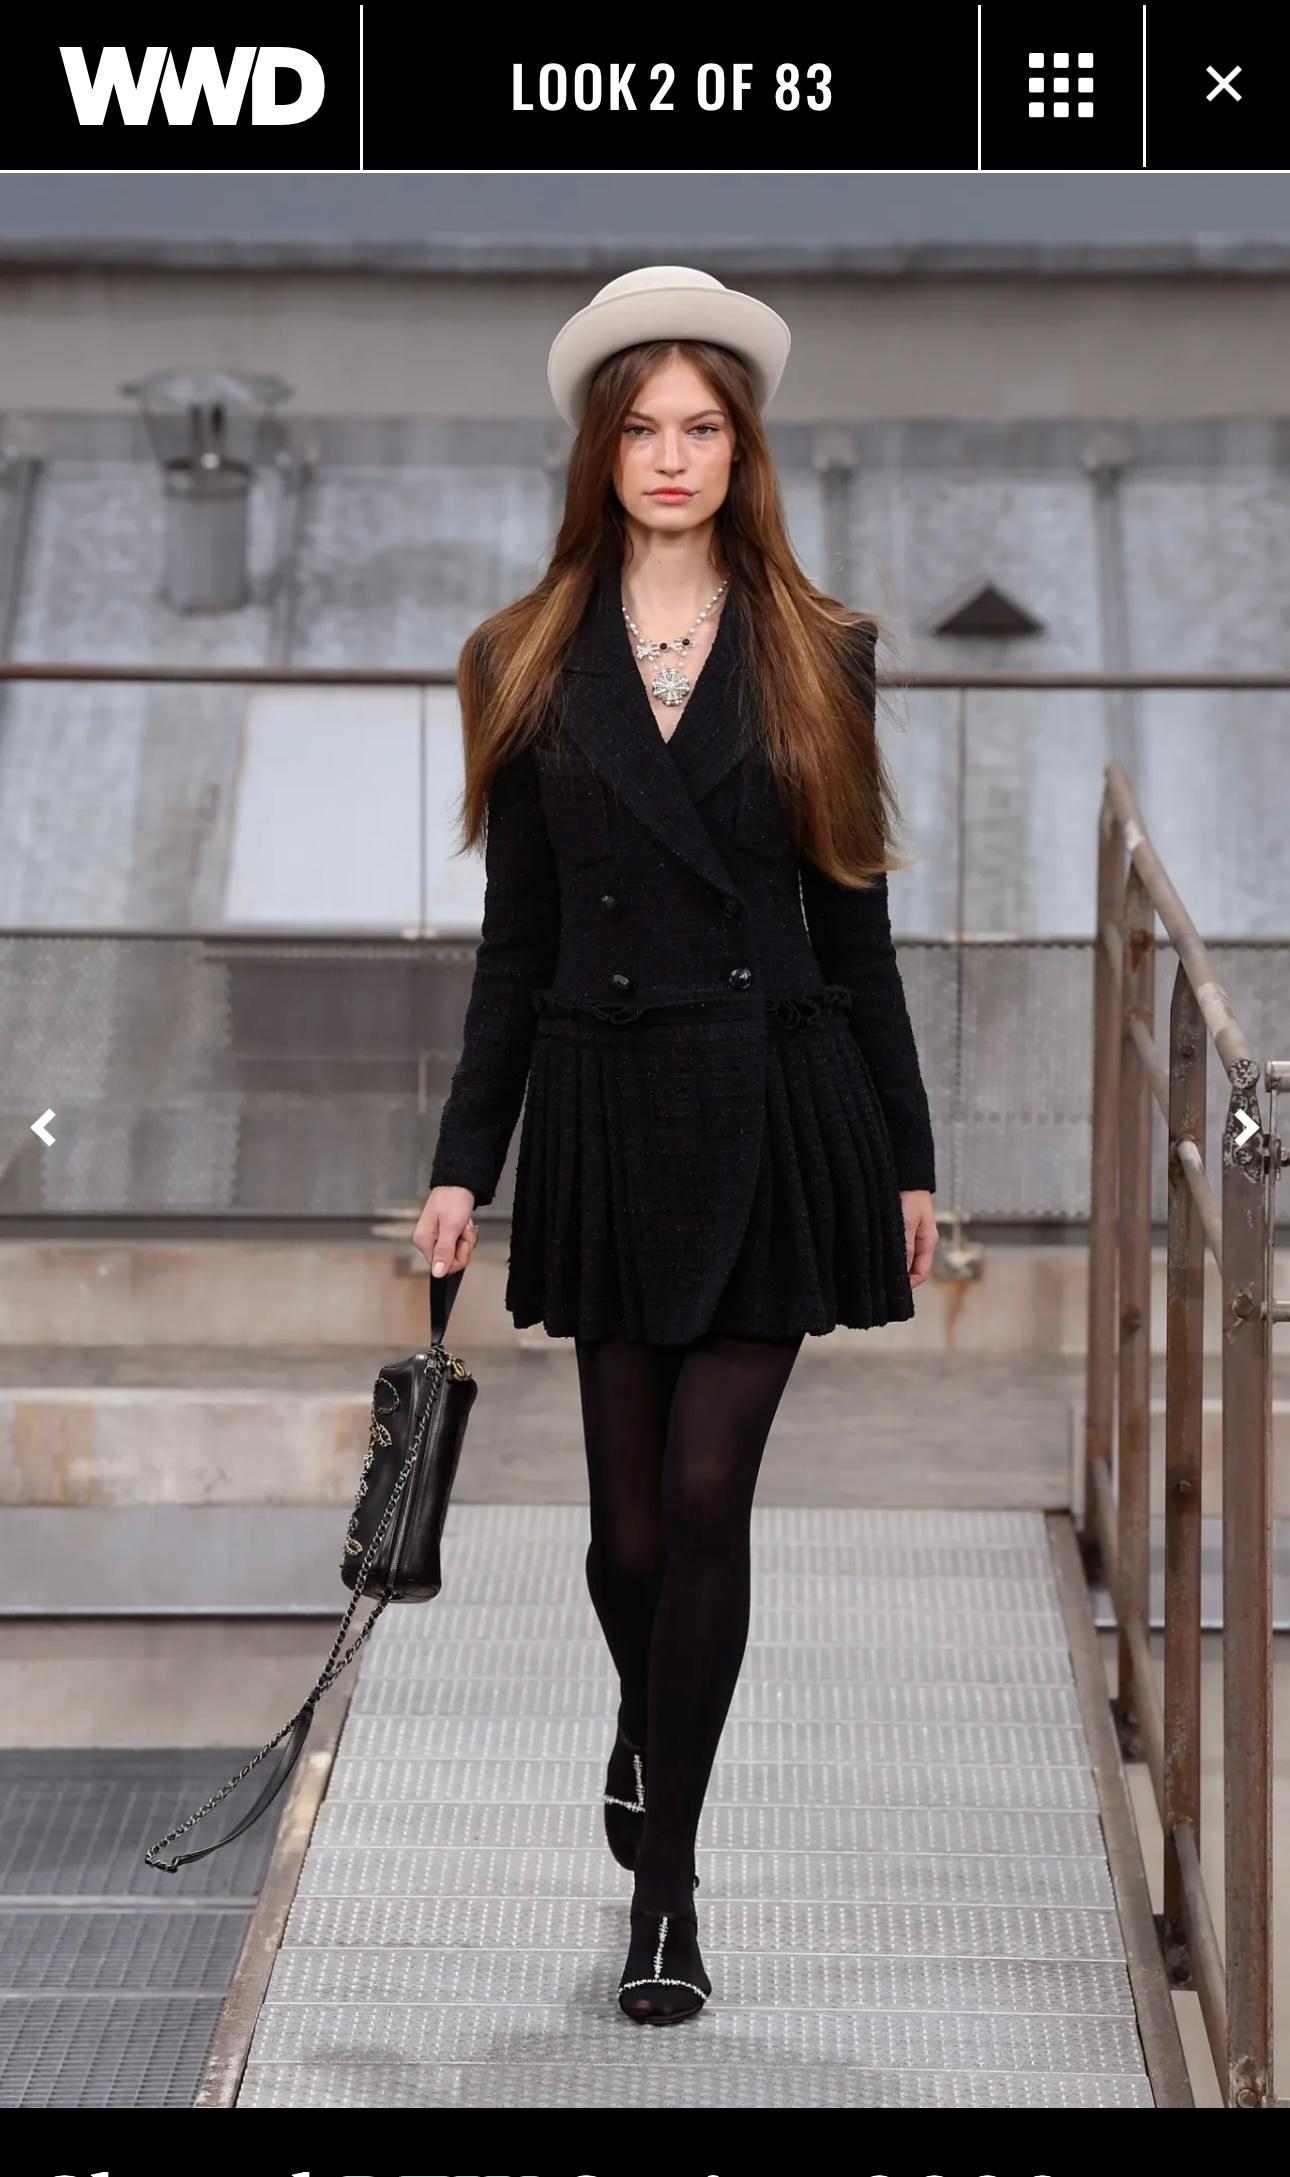 Look # 2 from Catwalk 2020 Spring!
Not negotiable
New Chanel black & navy lesage tweed jacket / dress from Runway of 2020 Spring Collection, 20P
Prices on other sources starts from 5,000$ for a used piece!
- CC logo buttons at front and cuffs
- can